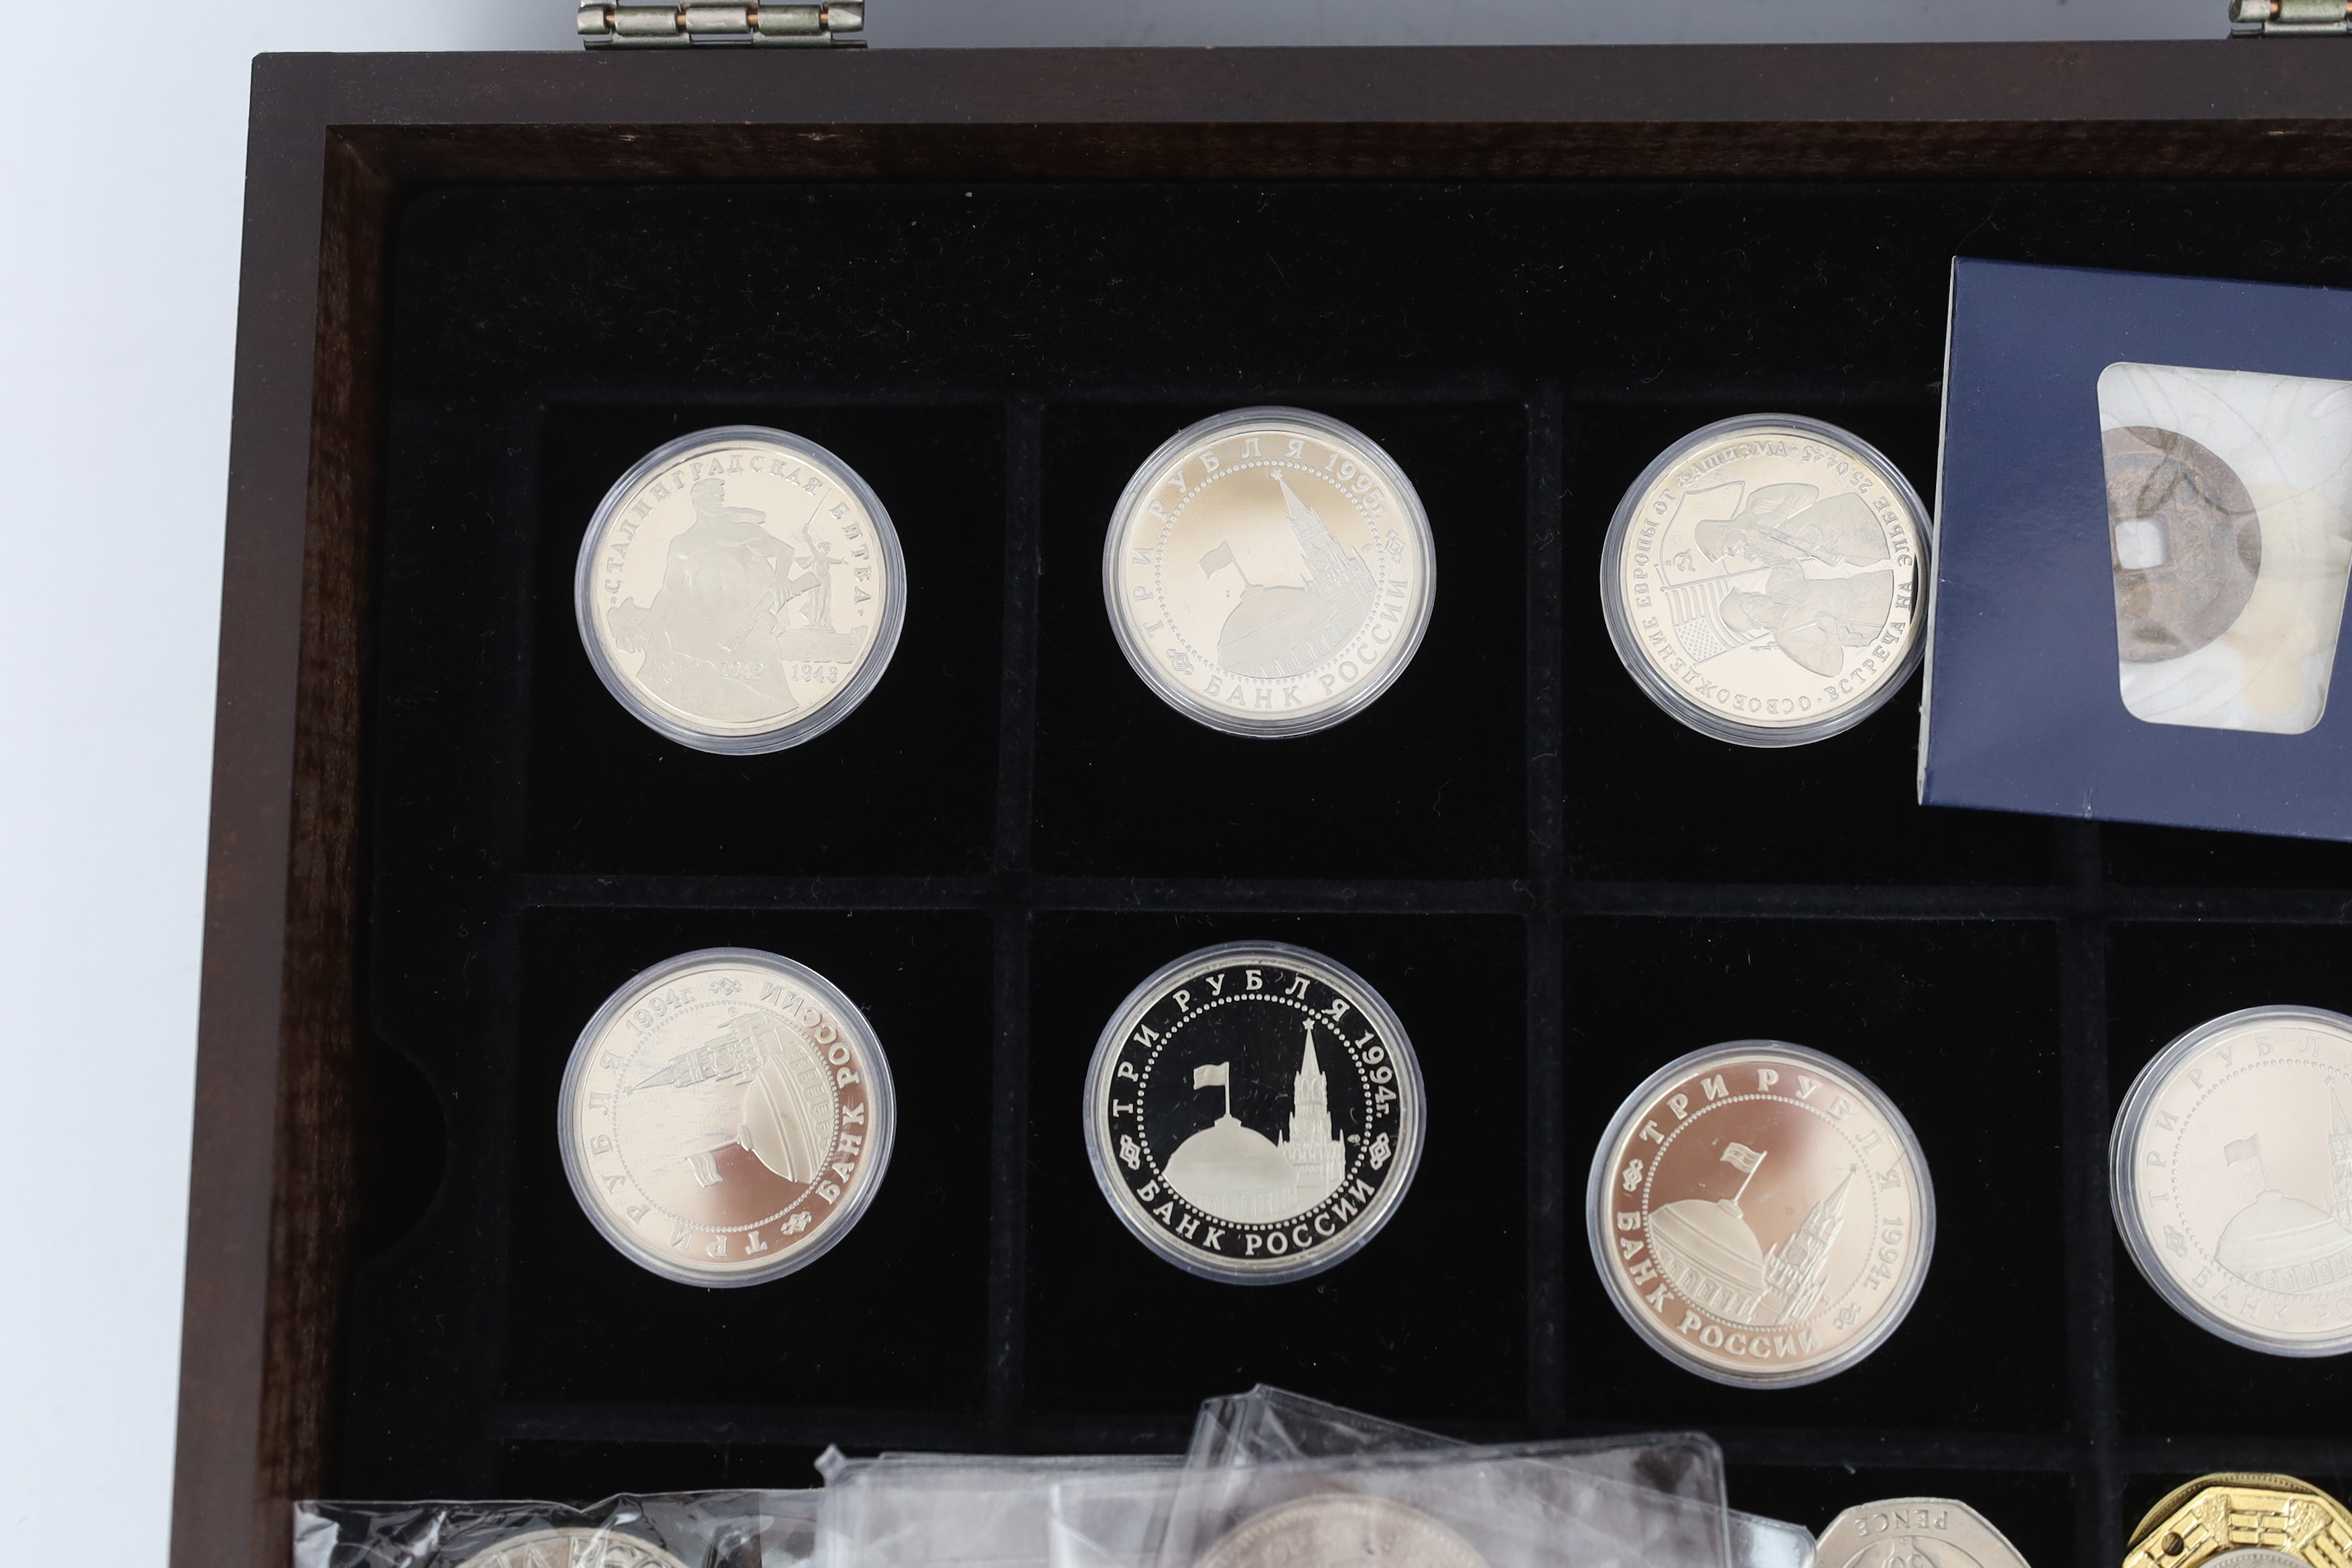 Russian Federation, A collection of 20 proof three rouble coins, 1994 and 1995 and QEII British coins